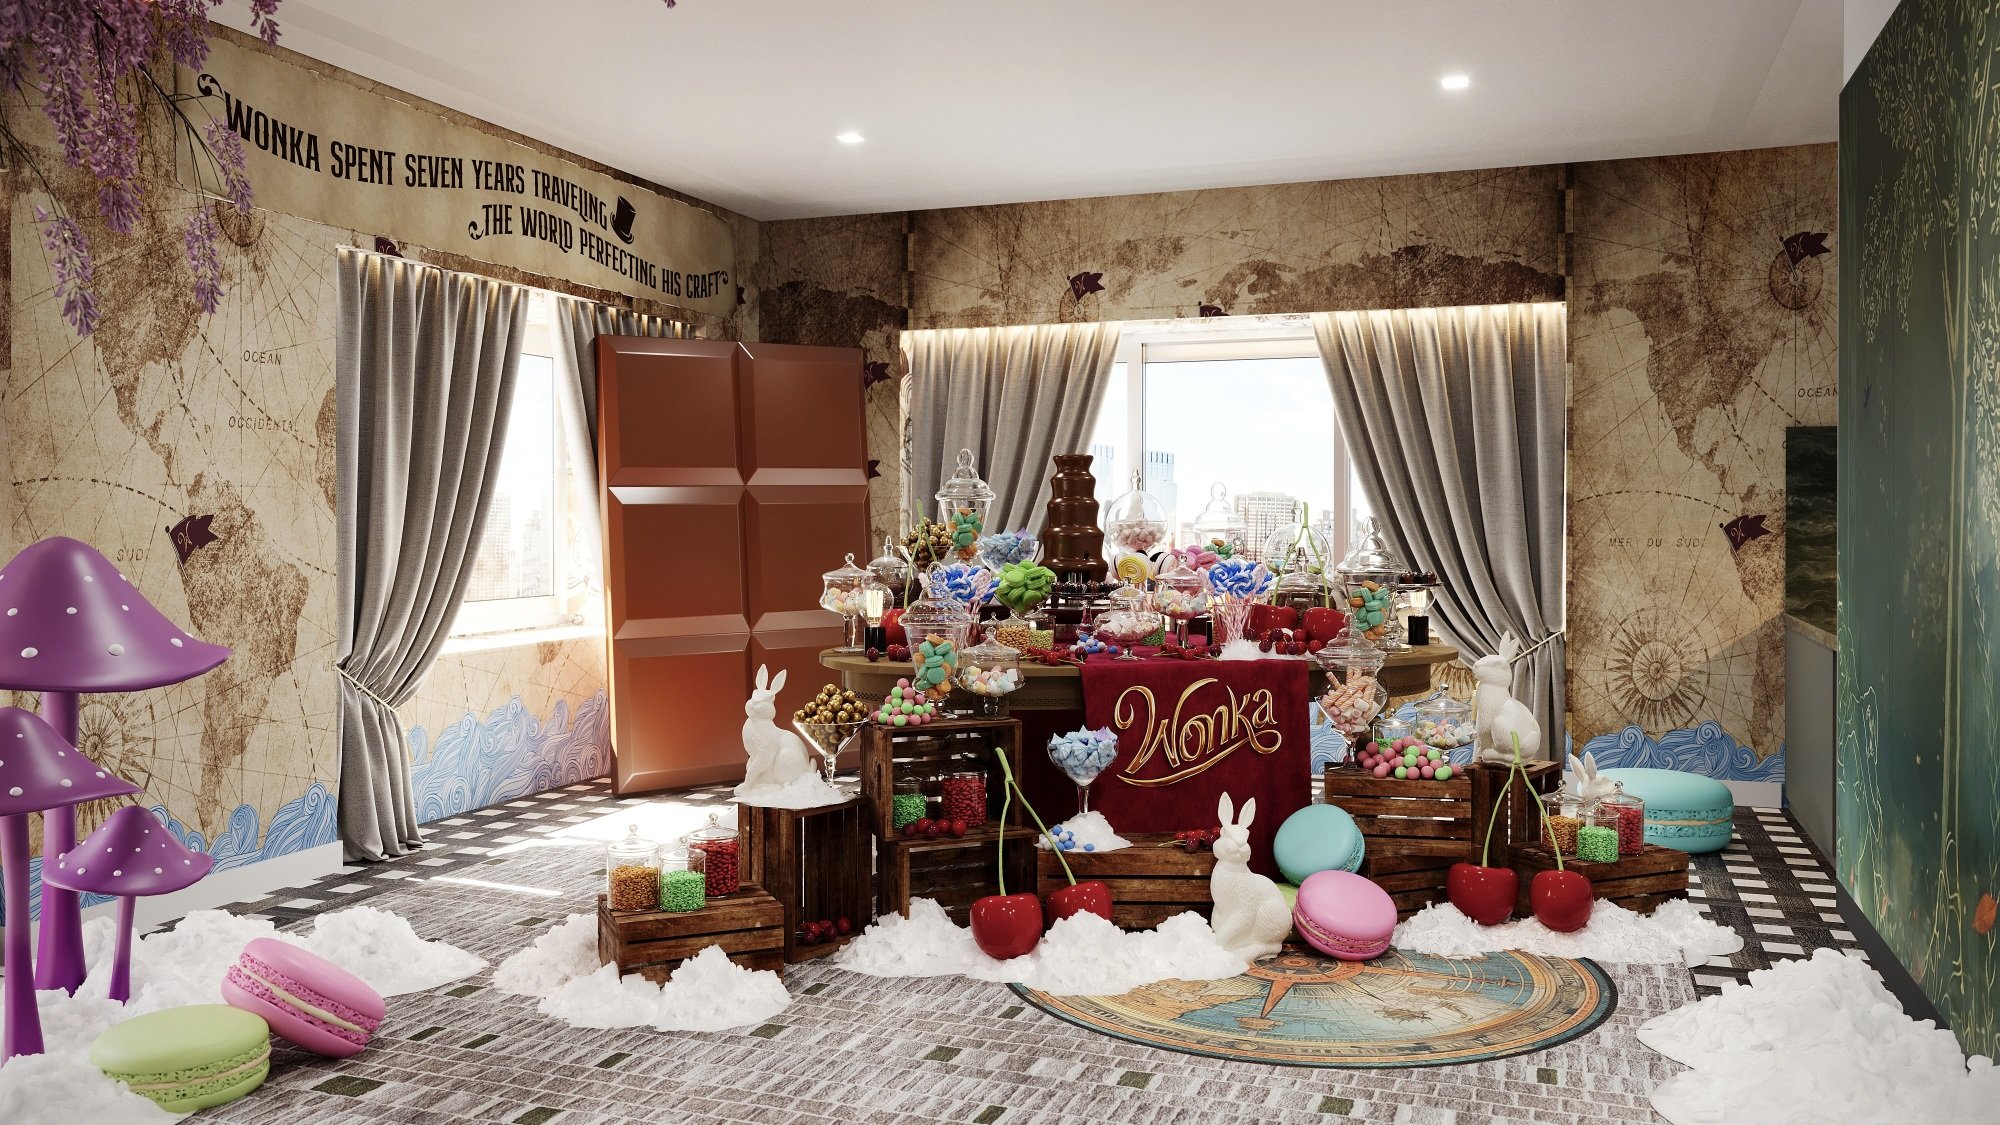 A "Wonka"-themed hotel room full of chocolates and candy.